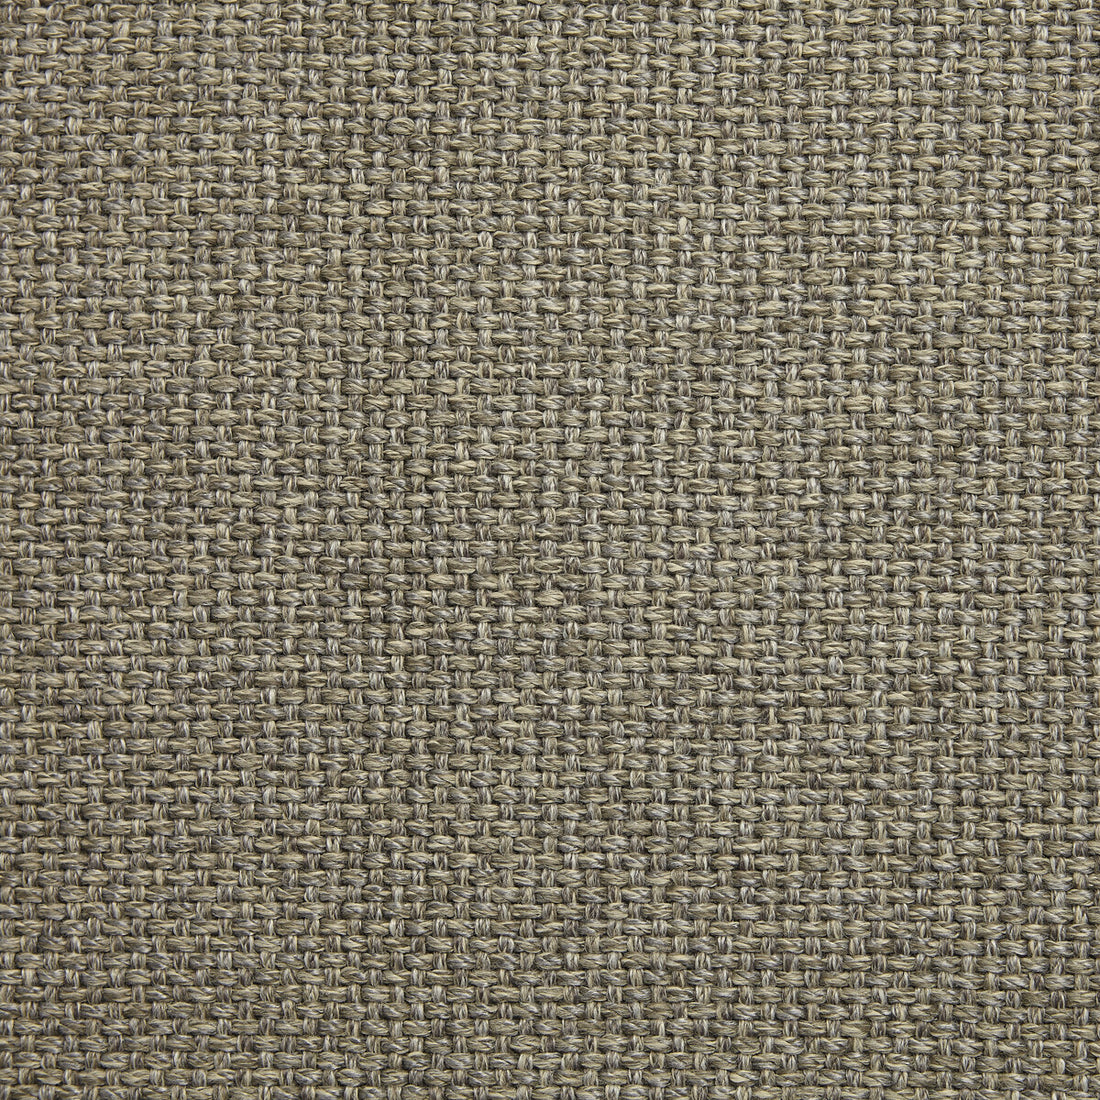 Begur fabric in 1 color - pattern LZ-30397.01.0 - by Kravet Design in the Lizzo Indoor/Outdoor collection